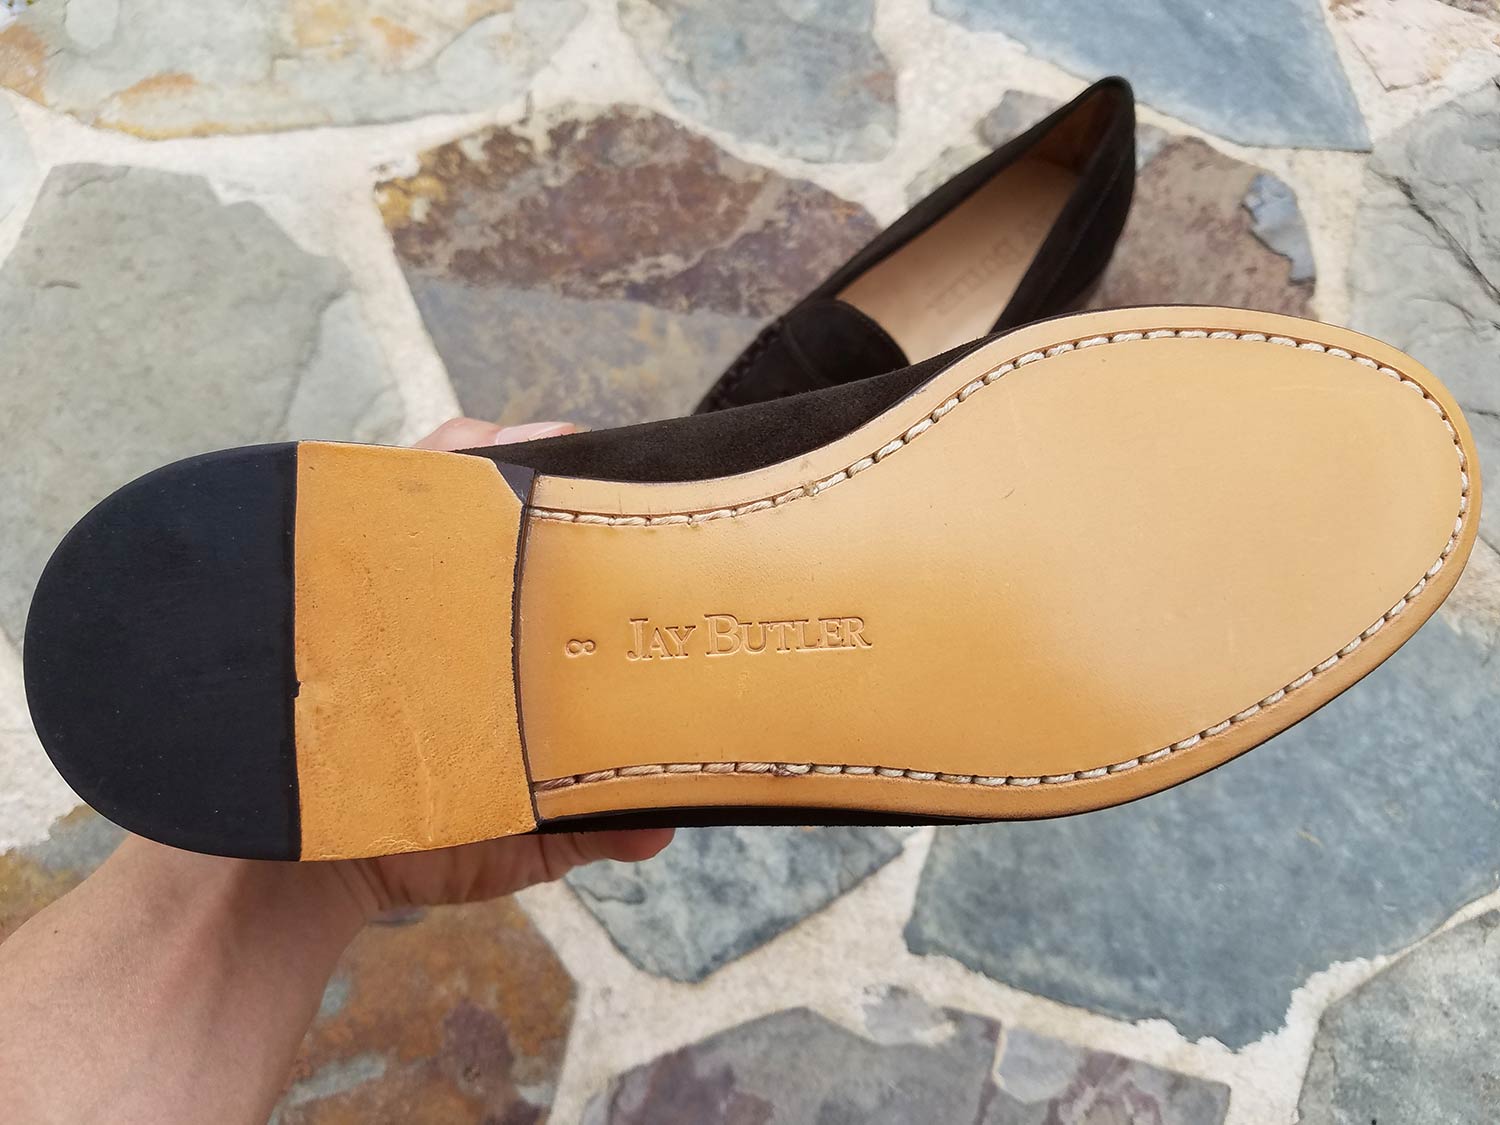 Jay Butler Leather Sole | GENTLEMAN WITHIN